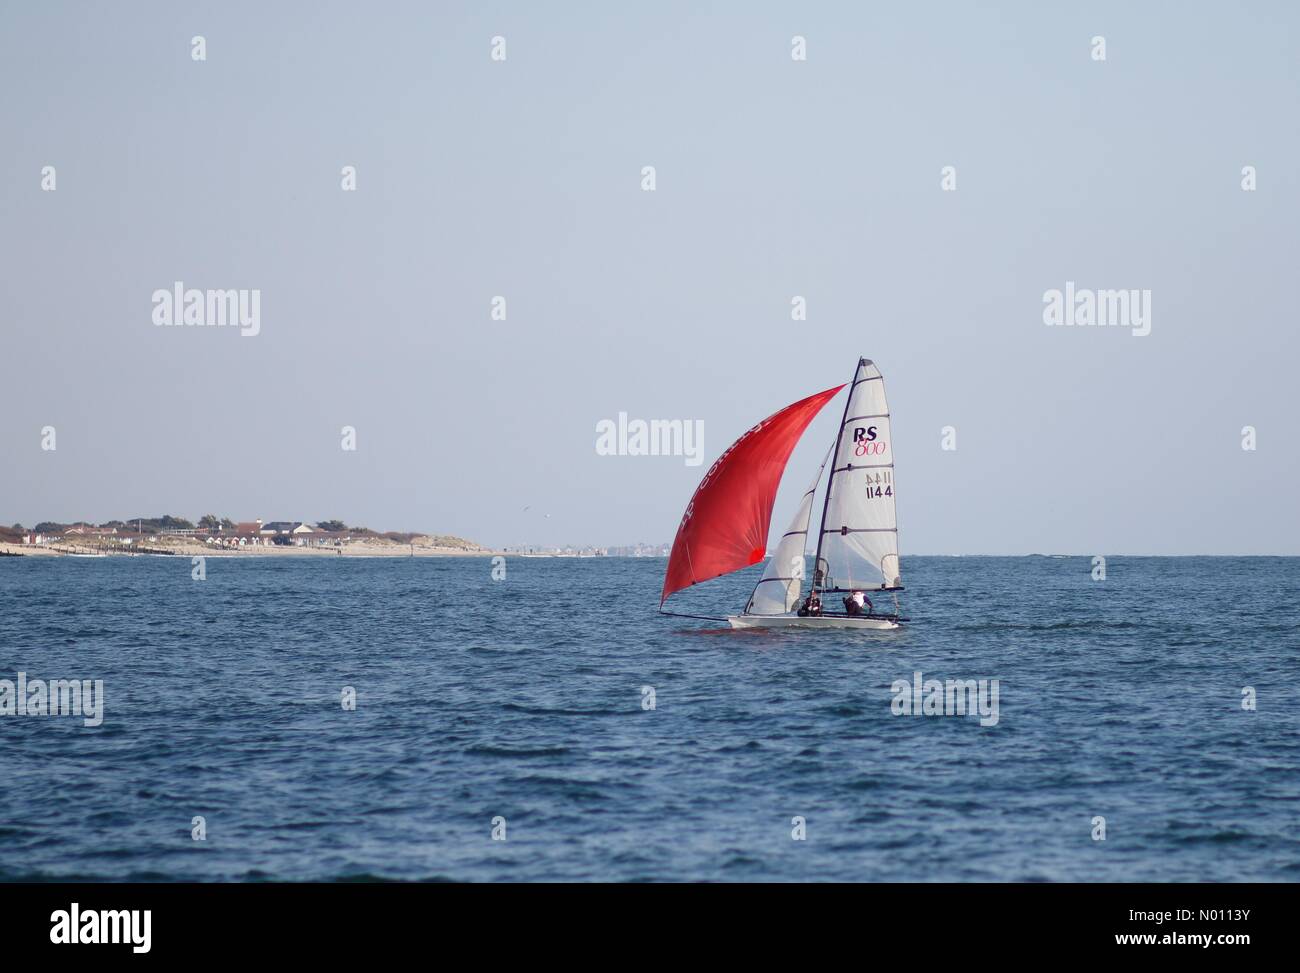 Hayling Island, Hampshire. 11th April, 2019. UK Weather: Sunny at Hayling. Bracklesham Road, Hayling Island. 11th April 2019. Beautiful sunny weather along the south coast today. A sailing boat off Hayling Island in Hants. Credit: jamesjagger/StockimoNews/Alamy Live News Stock Photo